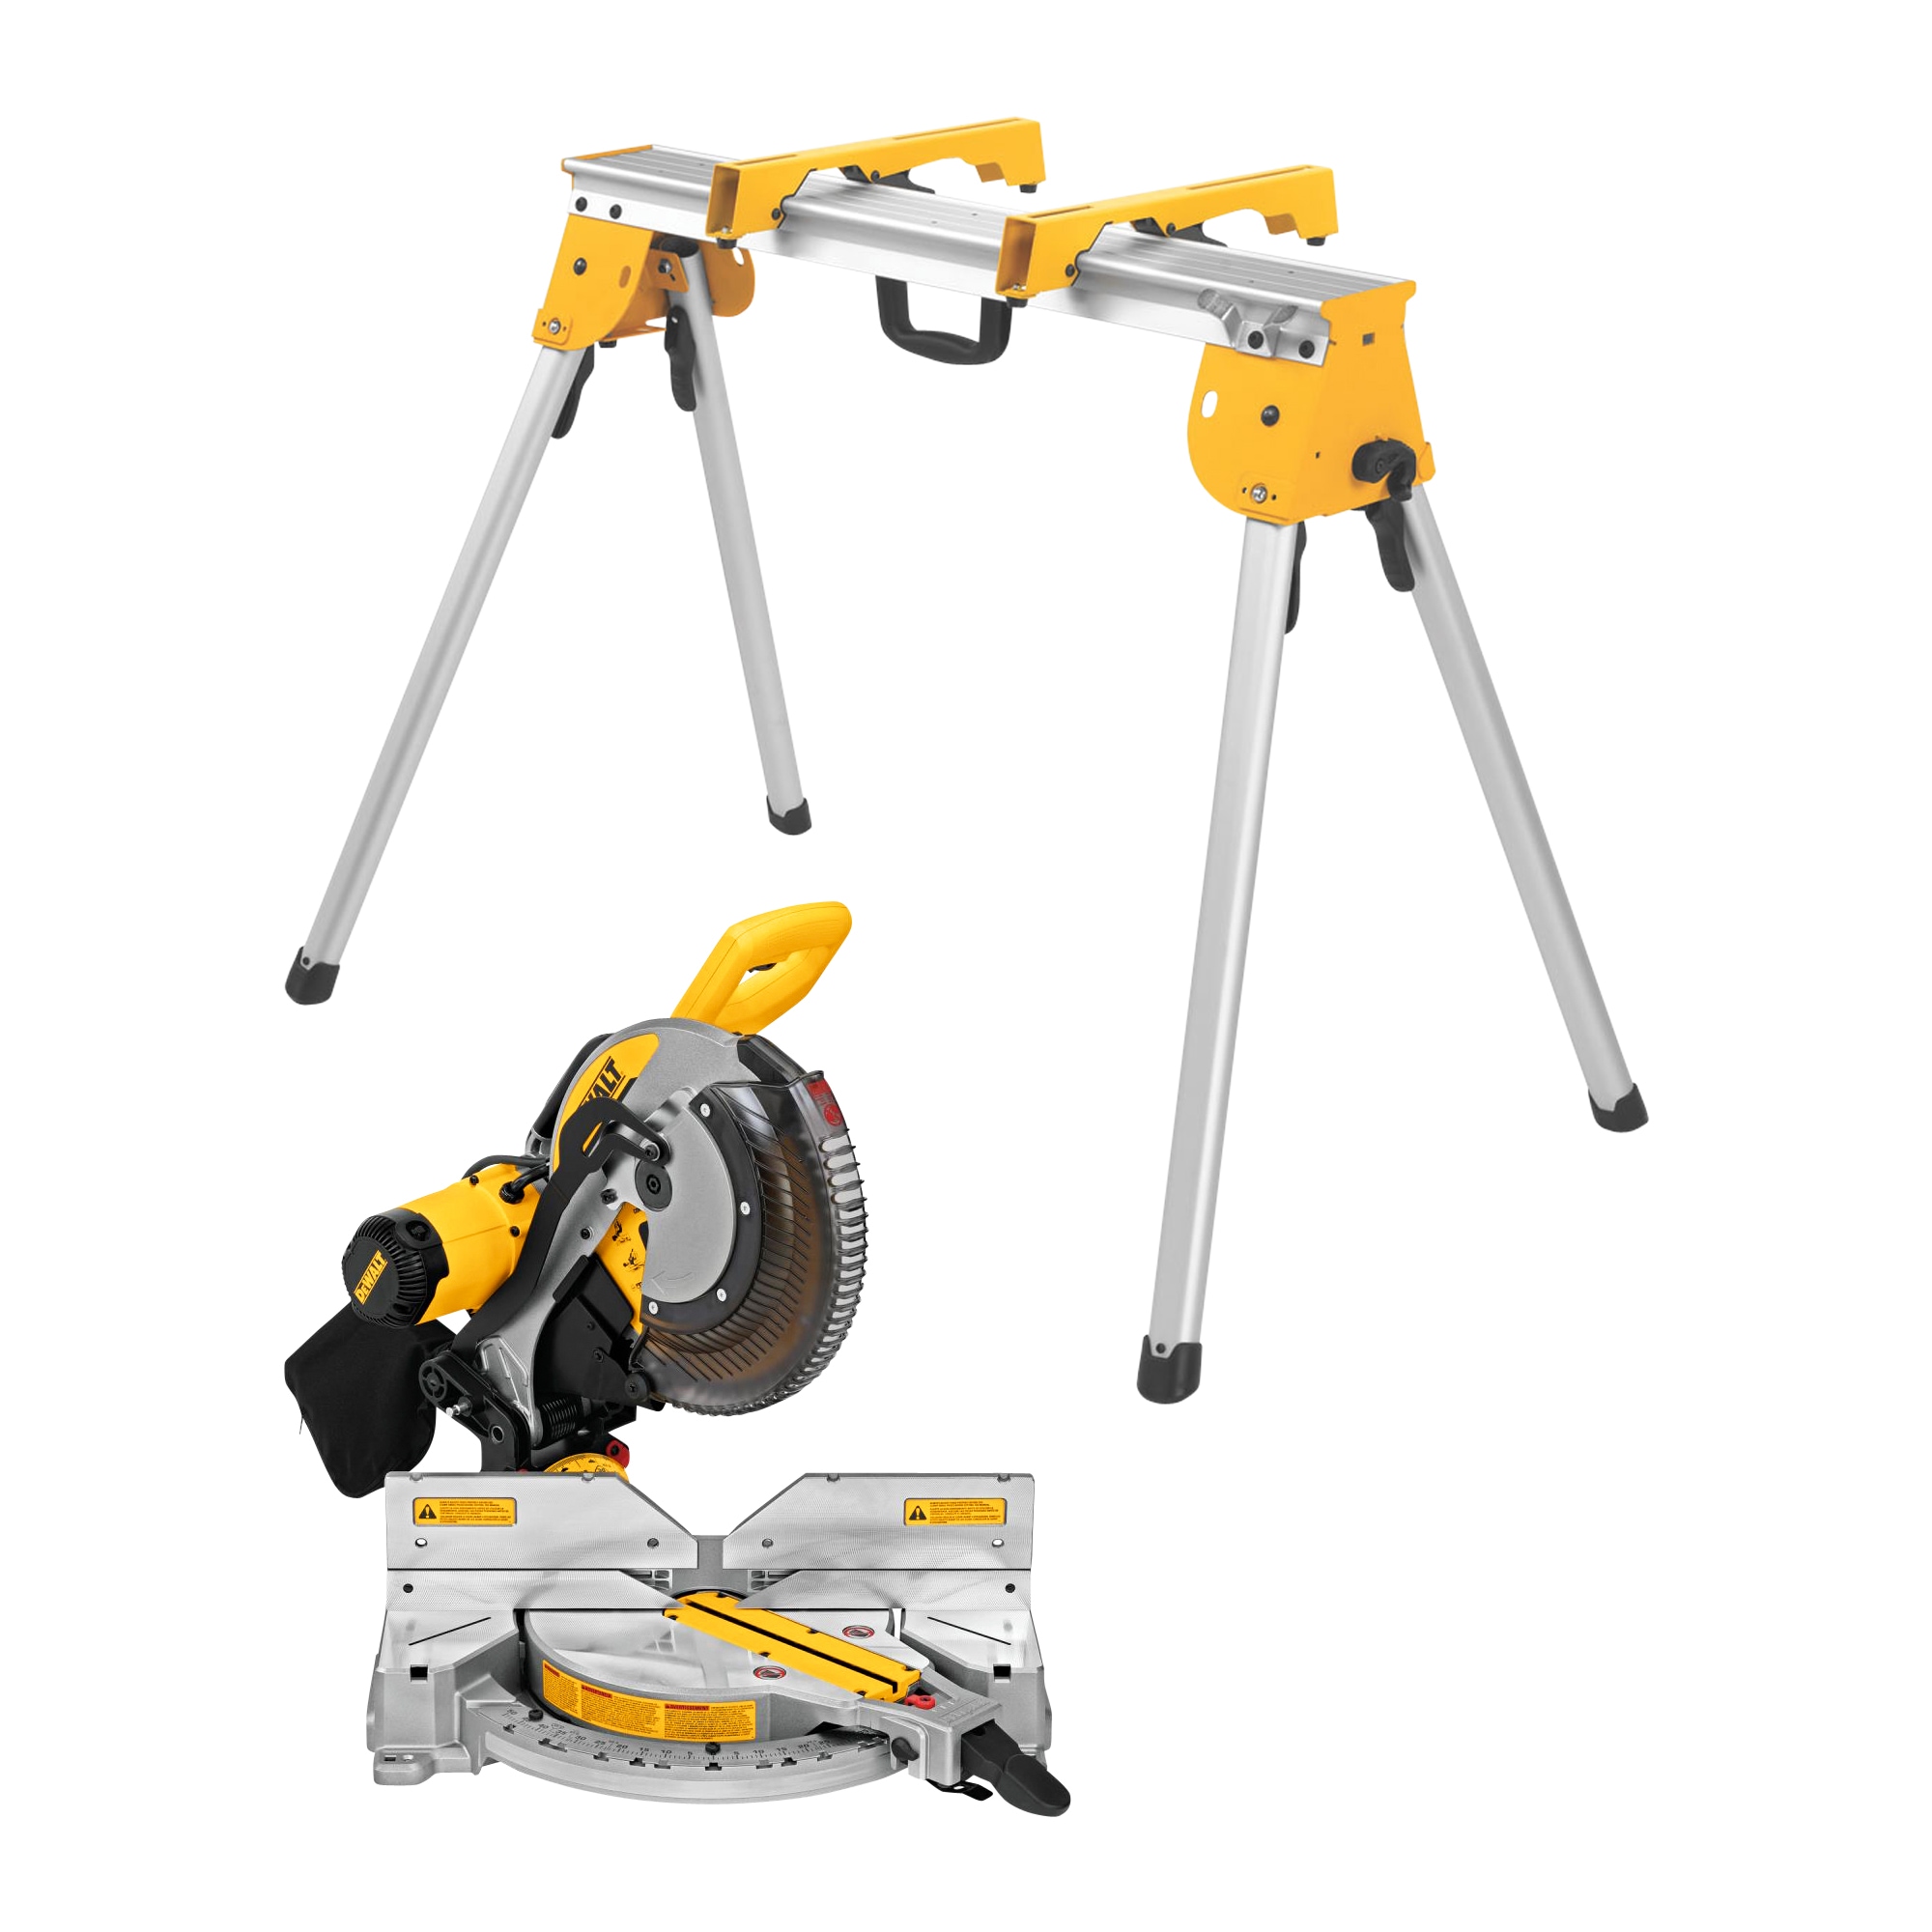 DEWALT 12-in 15 Amps Dual Bevel Compound Corded Miter Saw & Aluminum Miter Saw Stand